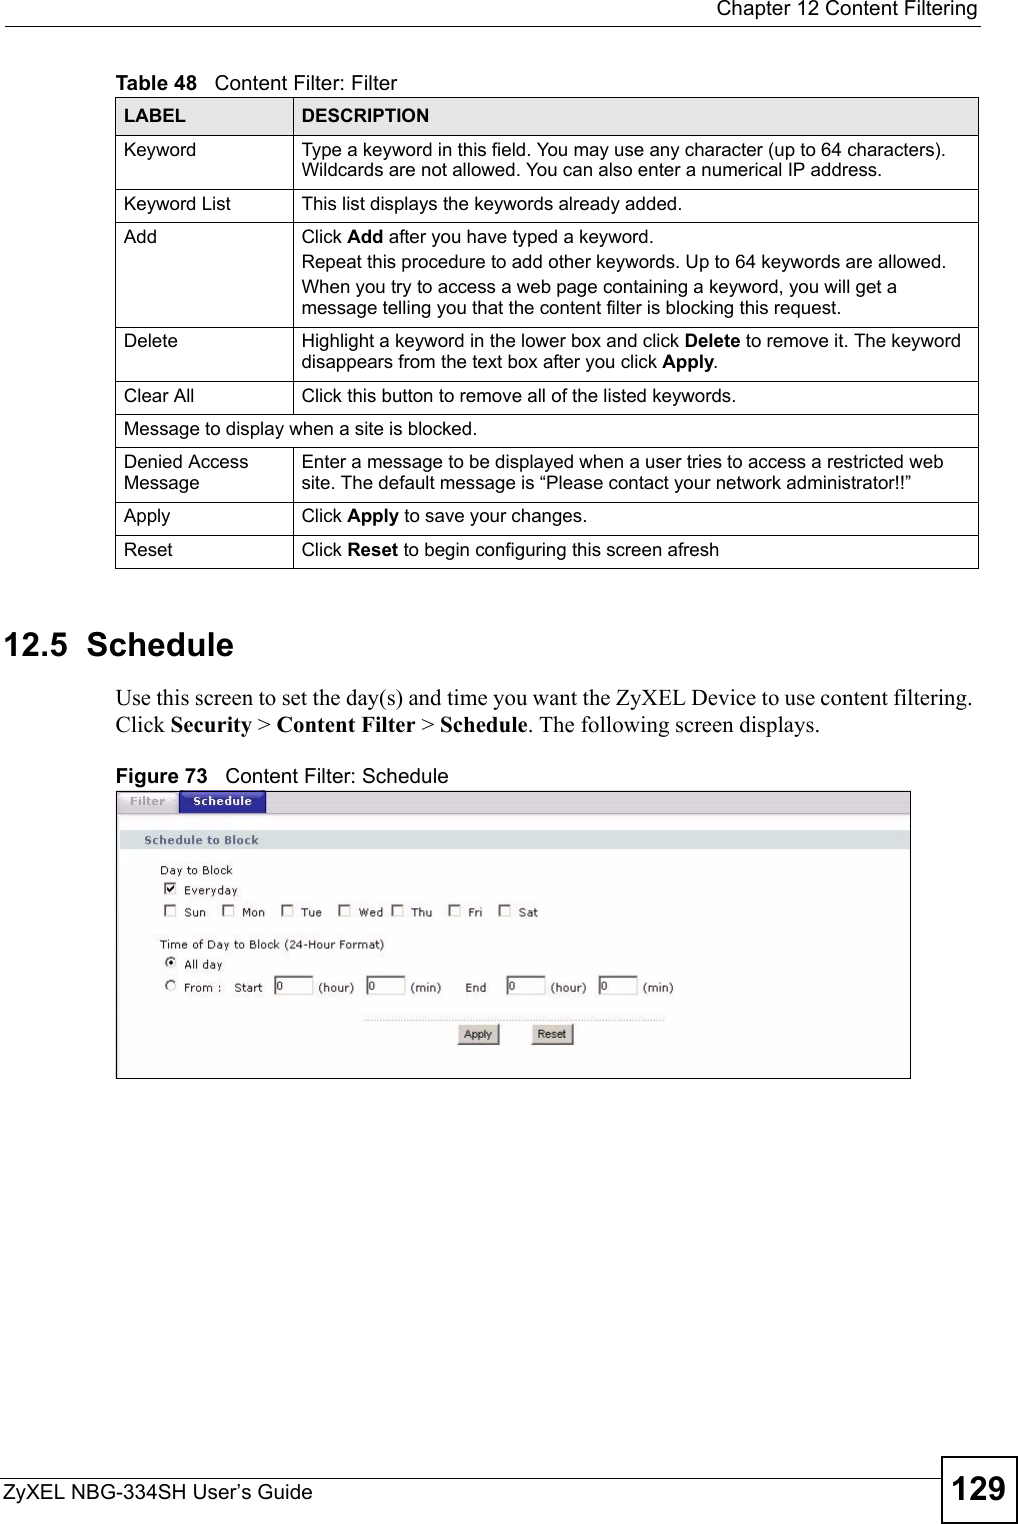  Chapter 12 Content FilteringZyXEL NBG-334SH User’s Guide 12912.5  ScheduleUse this screen to set the day(s) and time you want the ZyXEL Device to use content filtering. Click Security &gt; Content Filter &gt; Schedule. The following screen displays.Figure 73   Content Filter: ScheduleKeyword Type a keyword in this field. You may use any character (up to 64 characters). Wildcards are not allowed. You can also enter a numerical IP address.Keyword List This list displays the keywords already added. Add  Click Add after you have typed a keyword. Repeat this procedure to add other keywords. Up to 64 keywords are allowed.When you try to access a web page containing a keyword, you will get a message telling you that the content filter is blocking this request.Delete Highlight a keyword in the lower box and click Delete to remove it. The keyword disappears from the text box after you click Apply.Clear All Click this button to remove all of the listed keywords.Message to display when a site is blocked.Denied Access MessageEnter a message to be displayed when a user tries to access a restricted web site. The default message is “Please contact your network administrator!!”Apply Click Apply to save your changes.Reset Click Reset to begin configuring this screen afreshTable 48   Content Filter: FilterLABEL DESCRIPTION